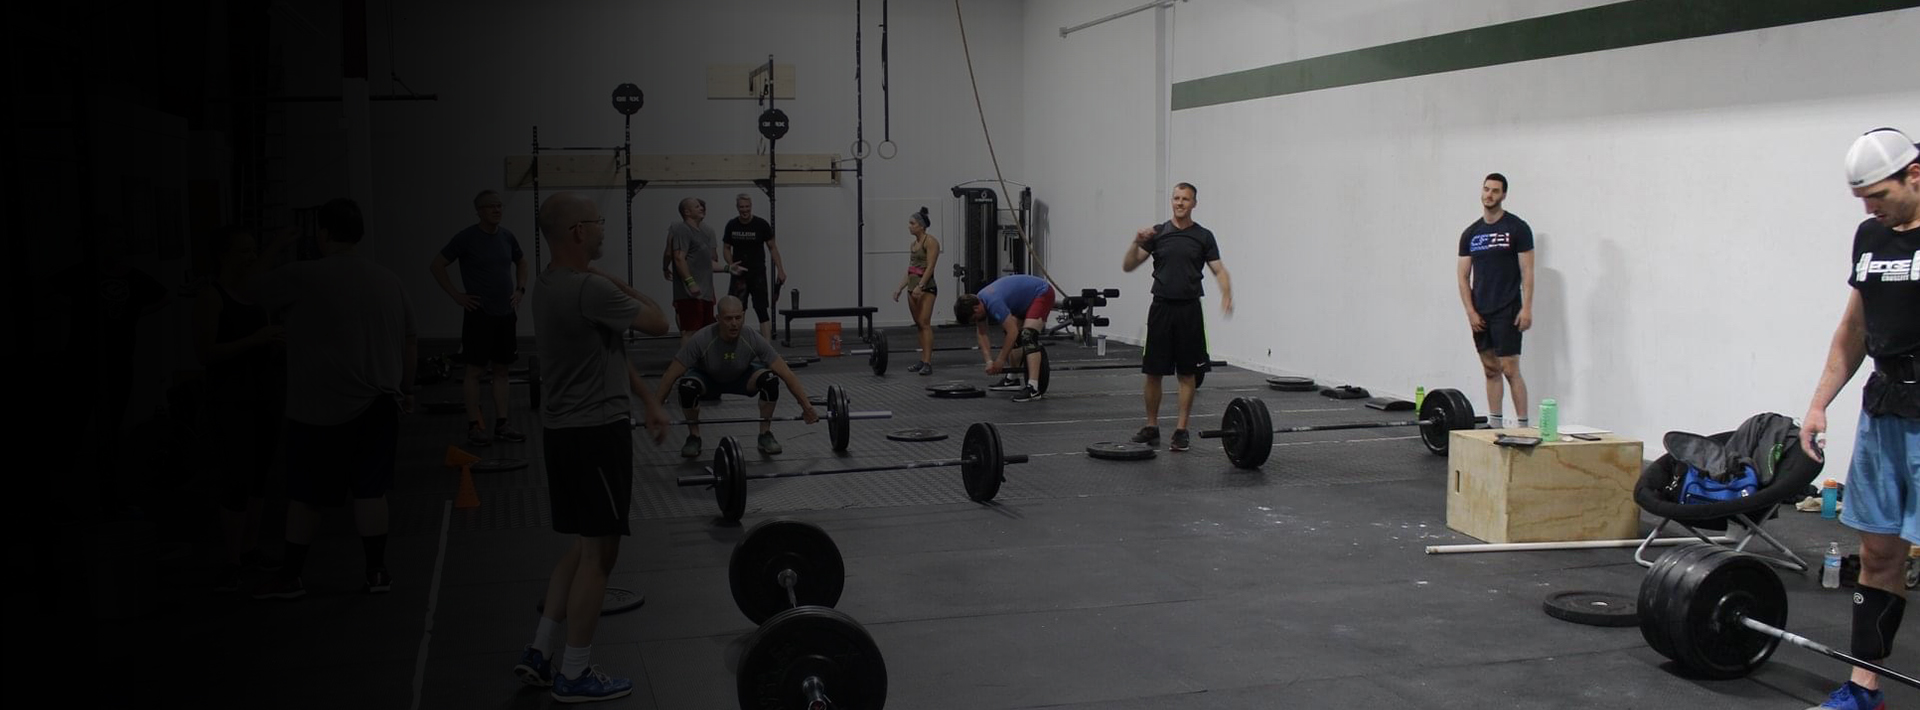 Contact Rep Eaters CrossFit to get fitness training from our personal trainers in Michigan